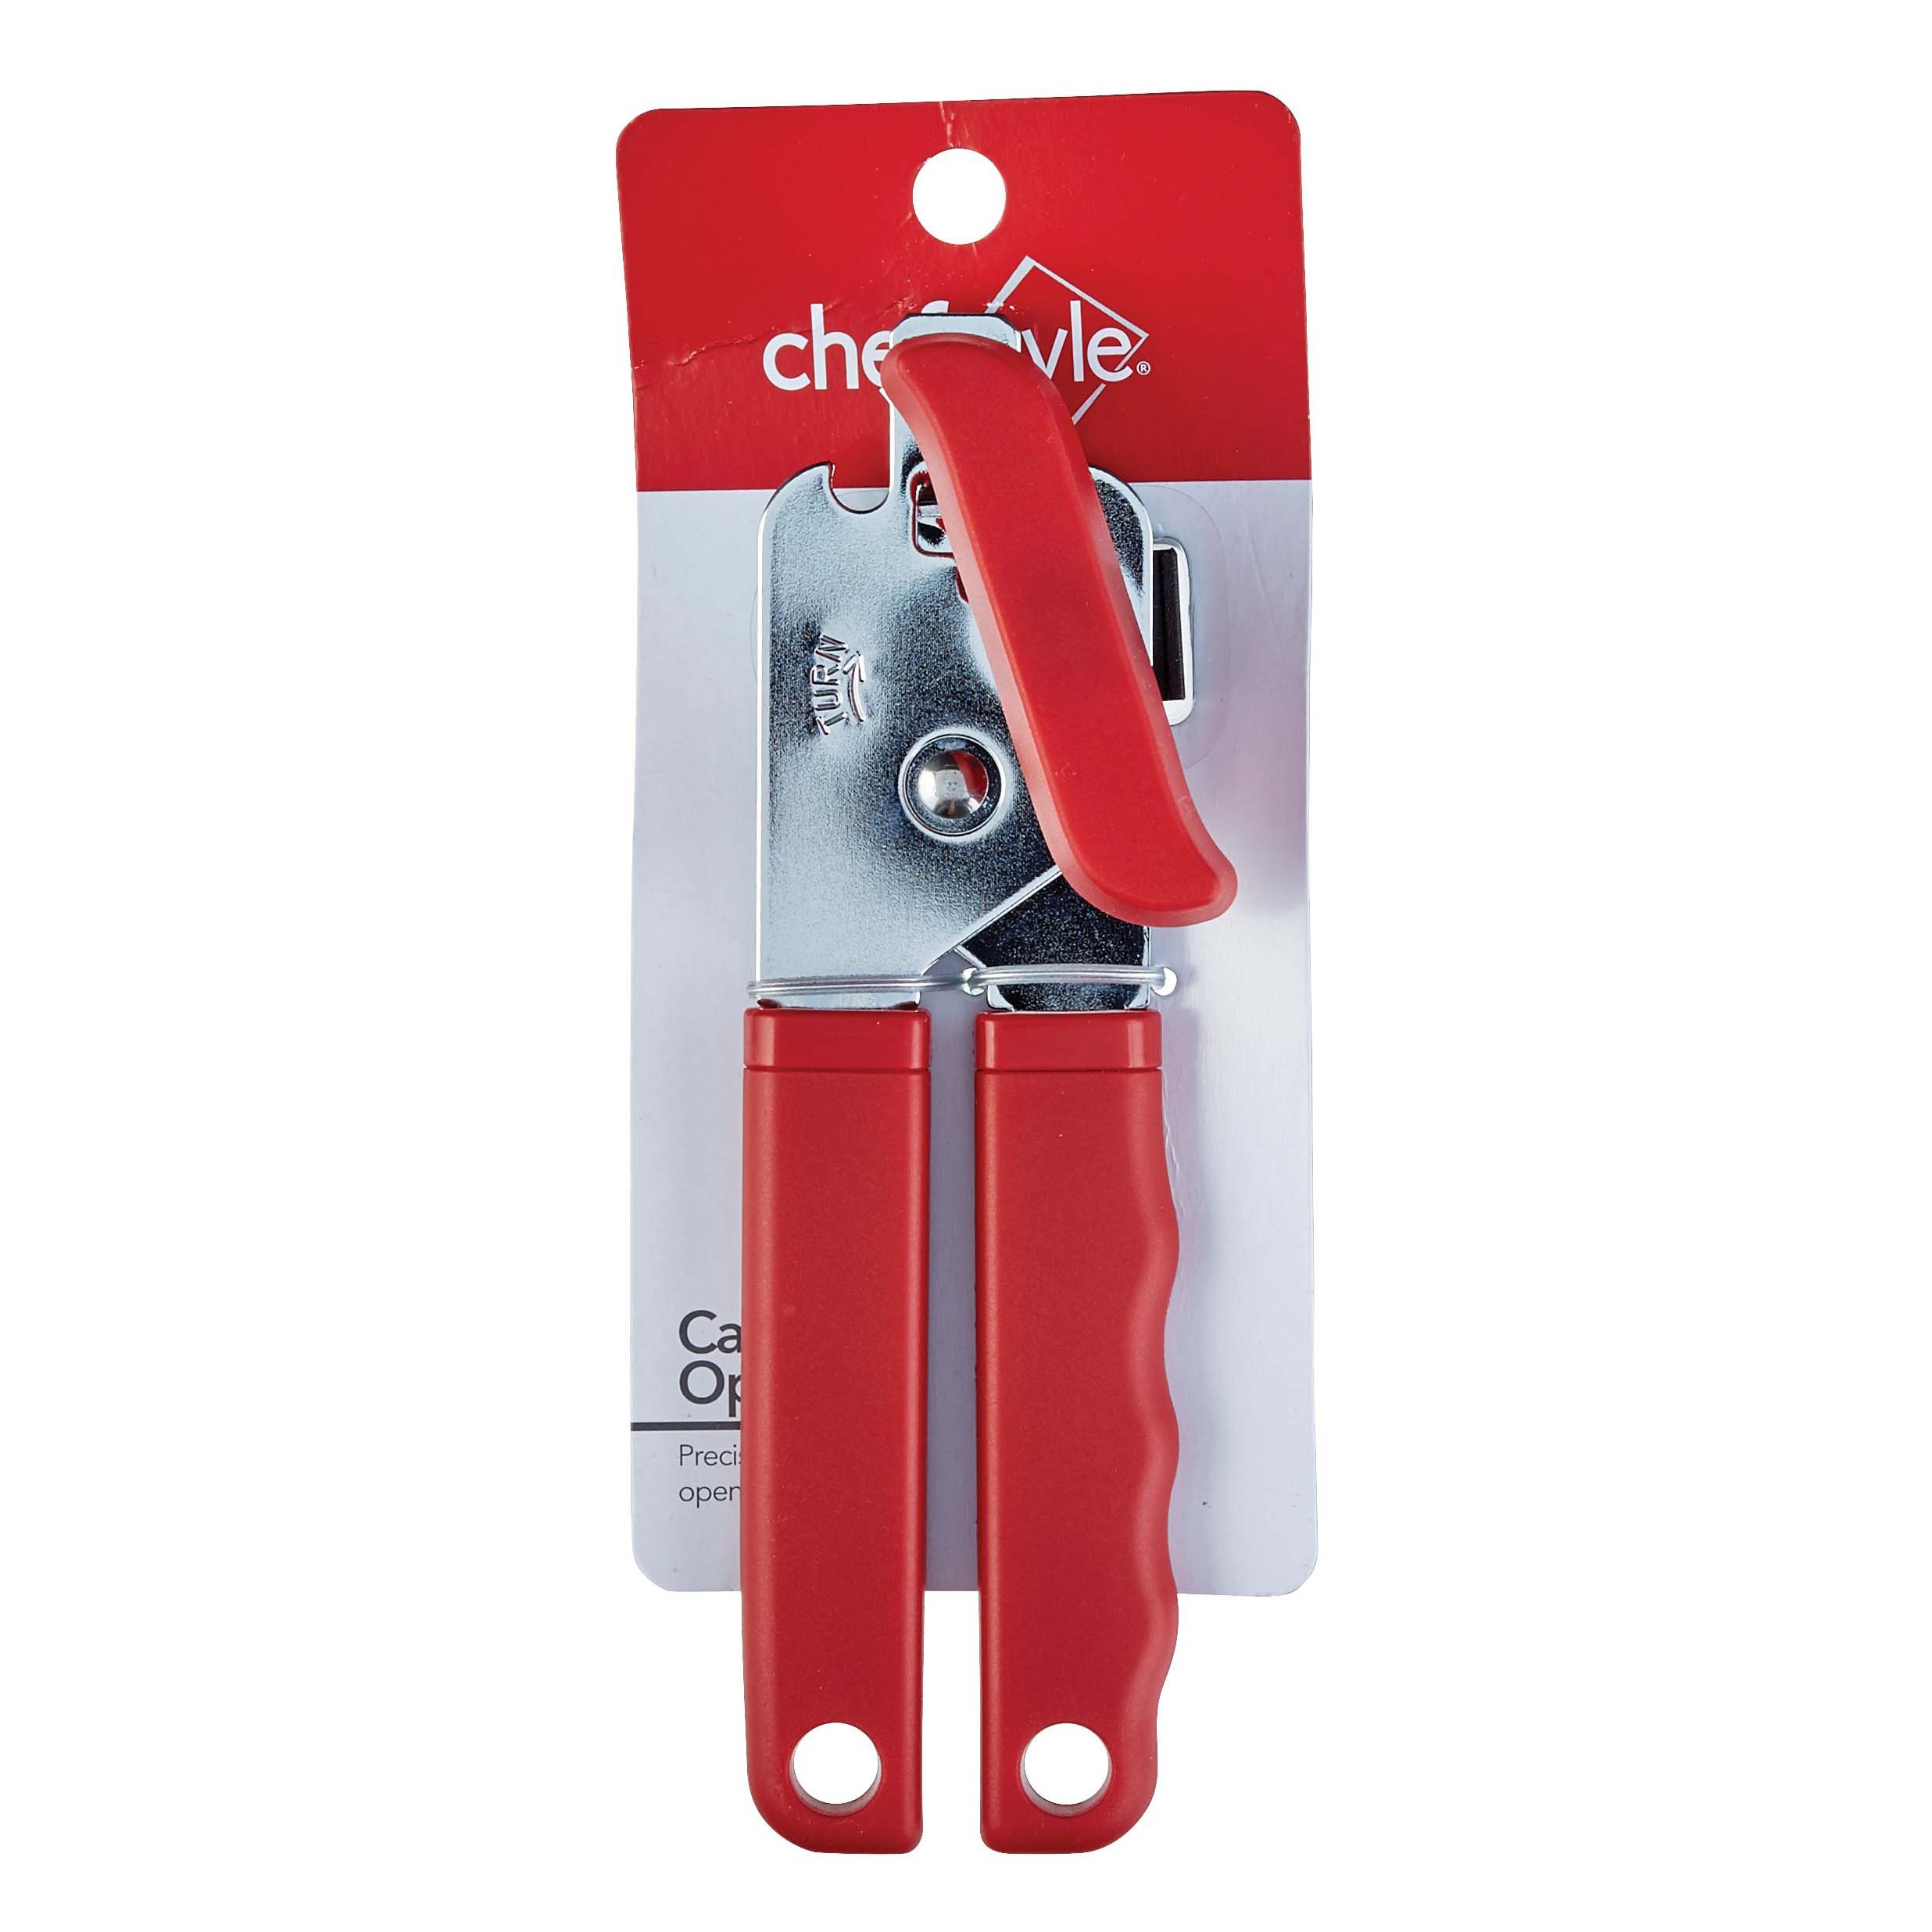 chefstyle Red Can Opener - Shop Bar Tools at H-E-B